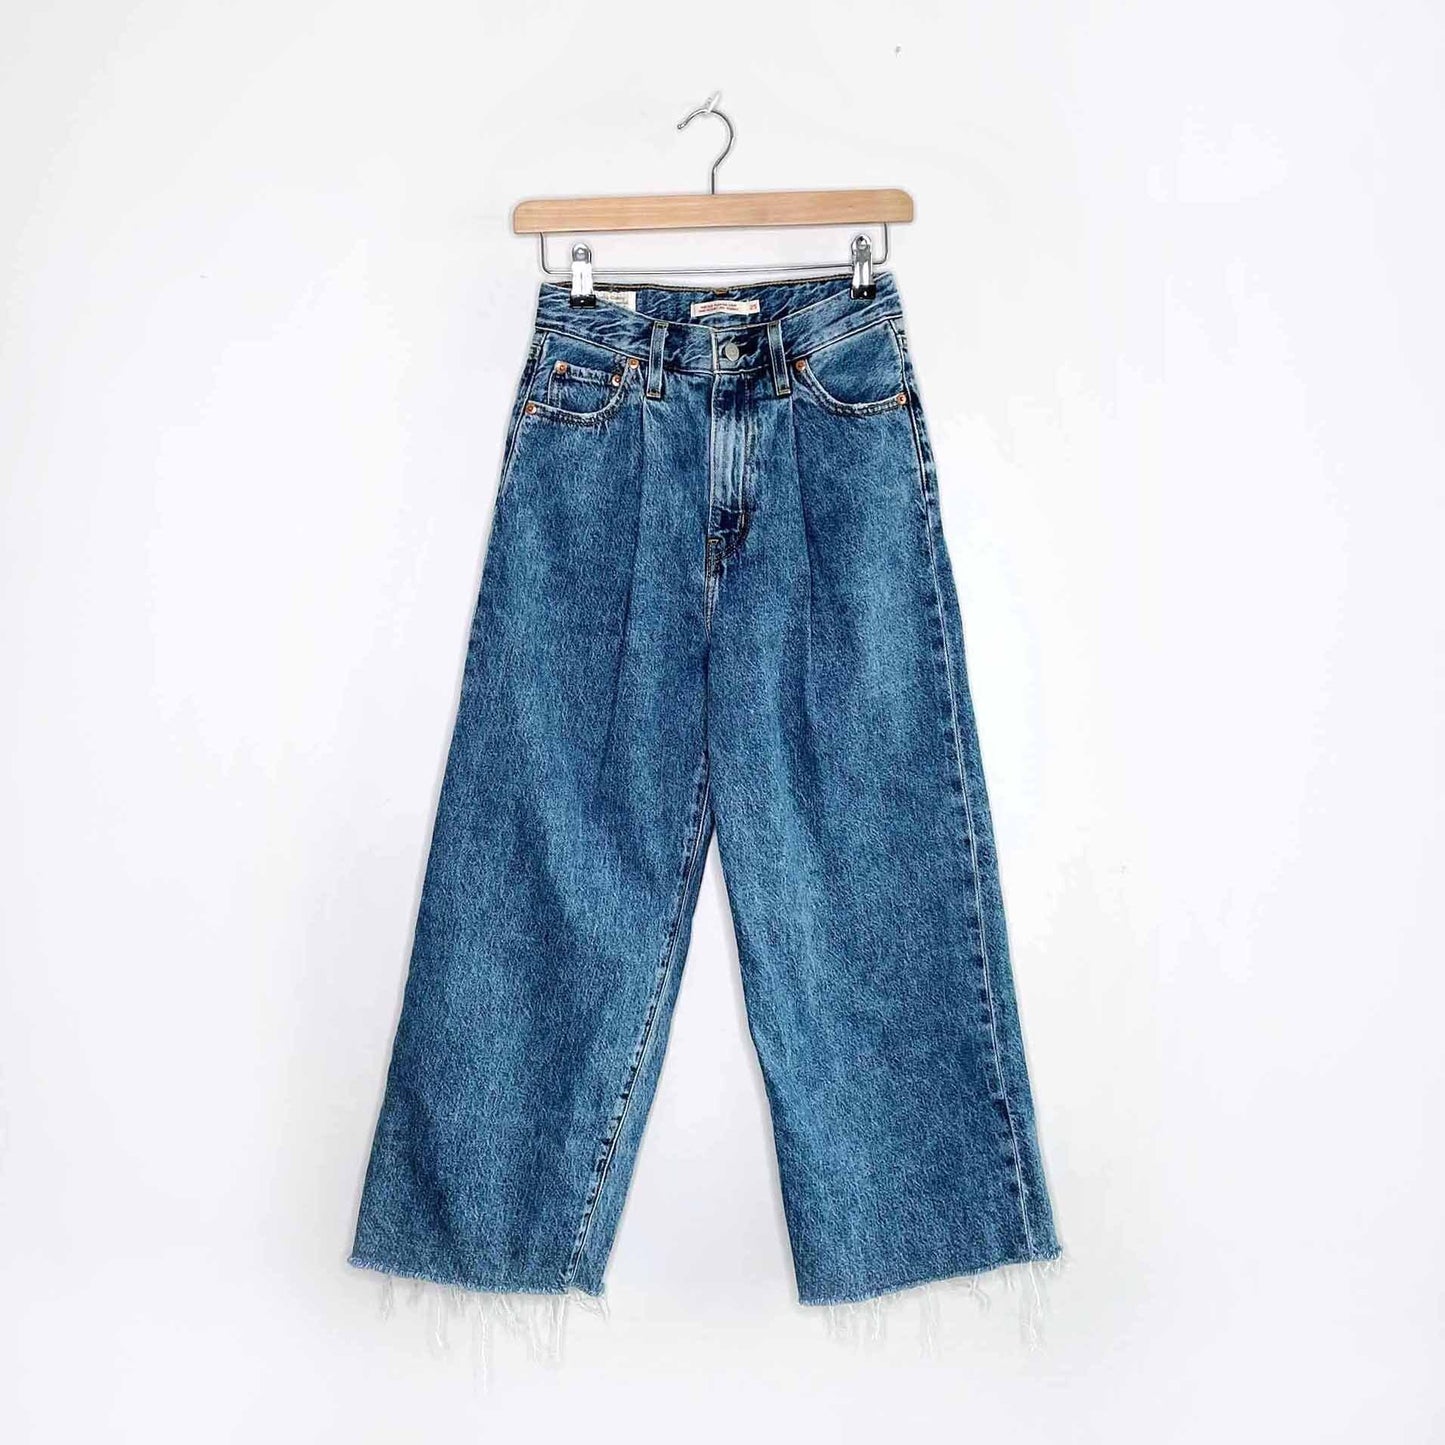 Levi's ribcage pleated crop jeans - size 25